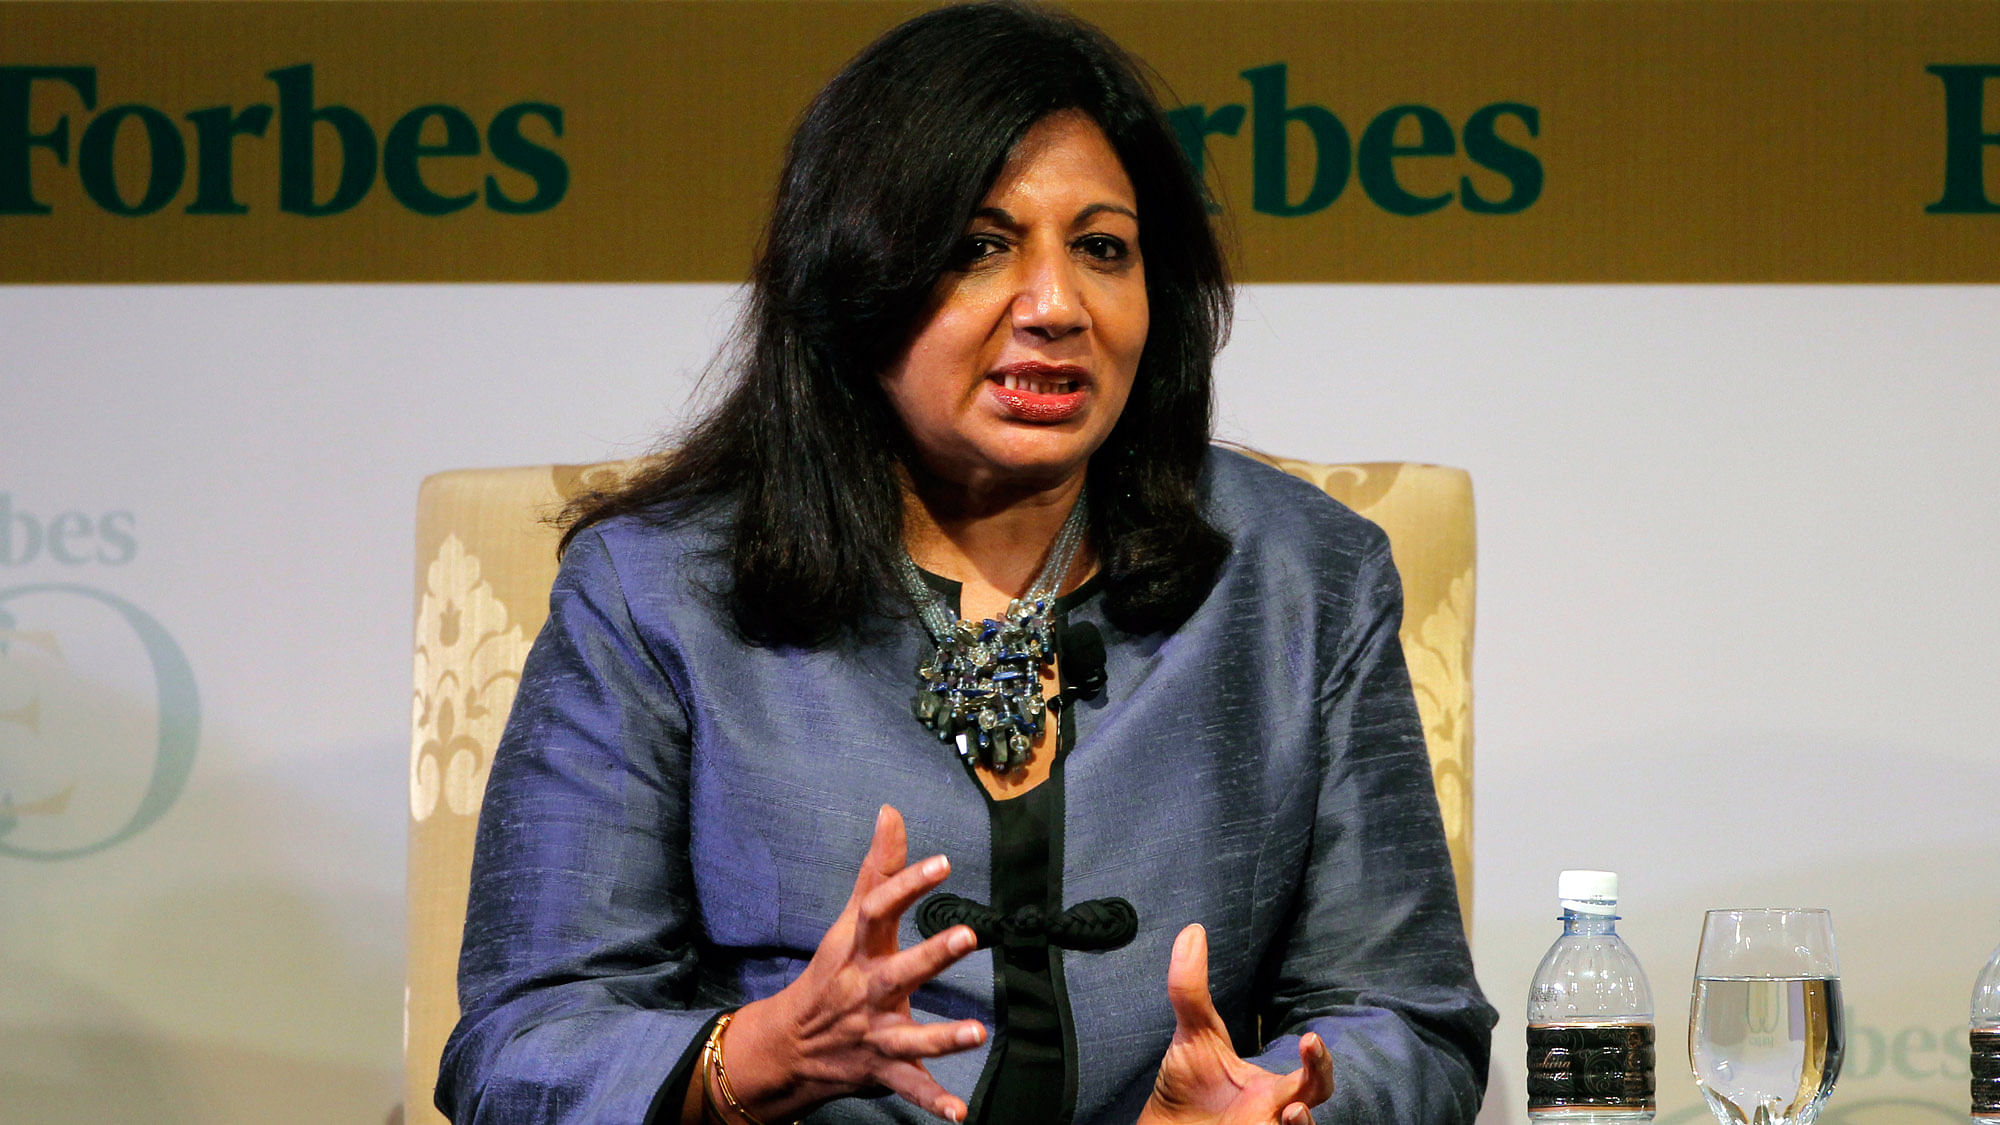 Australia has conferred its highest civilian honour, the Order of Australia honour, on Biocon founder Kiran Mazumdar-Shaw for her contribution towards advancing the country’s relationship with India.